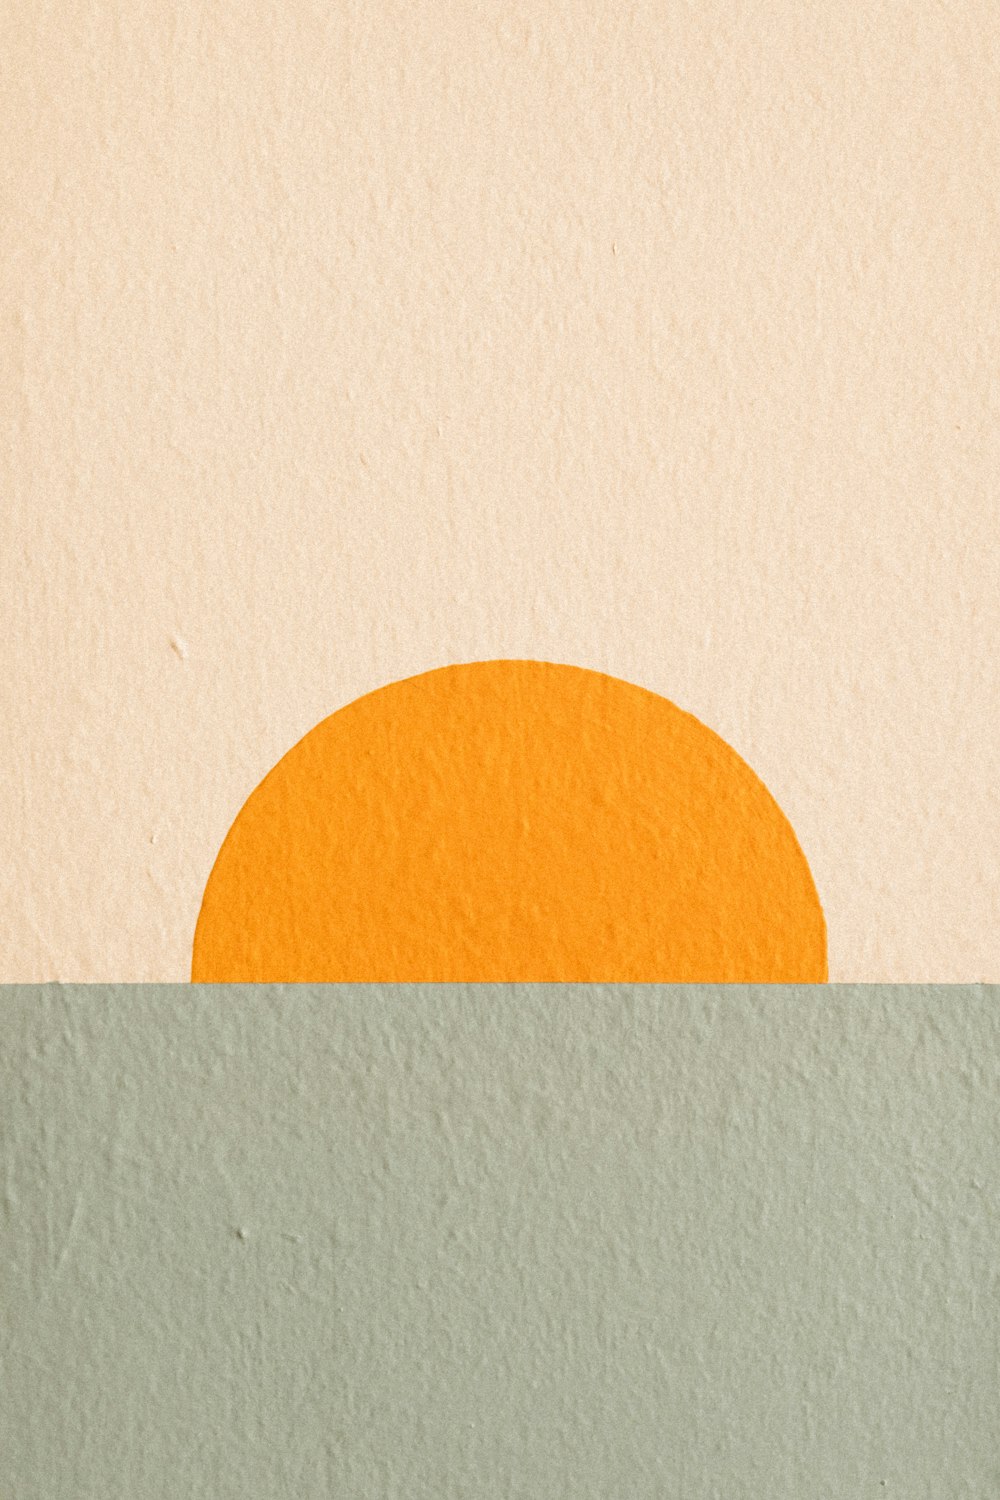 a painting of an orange sun in the middle of a body of water